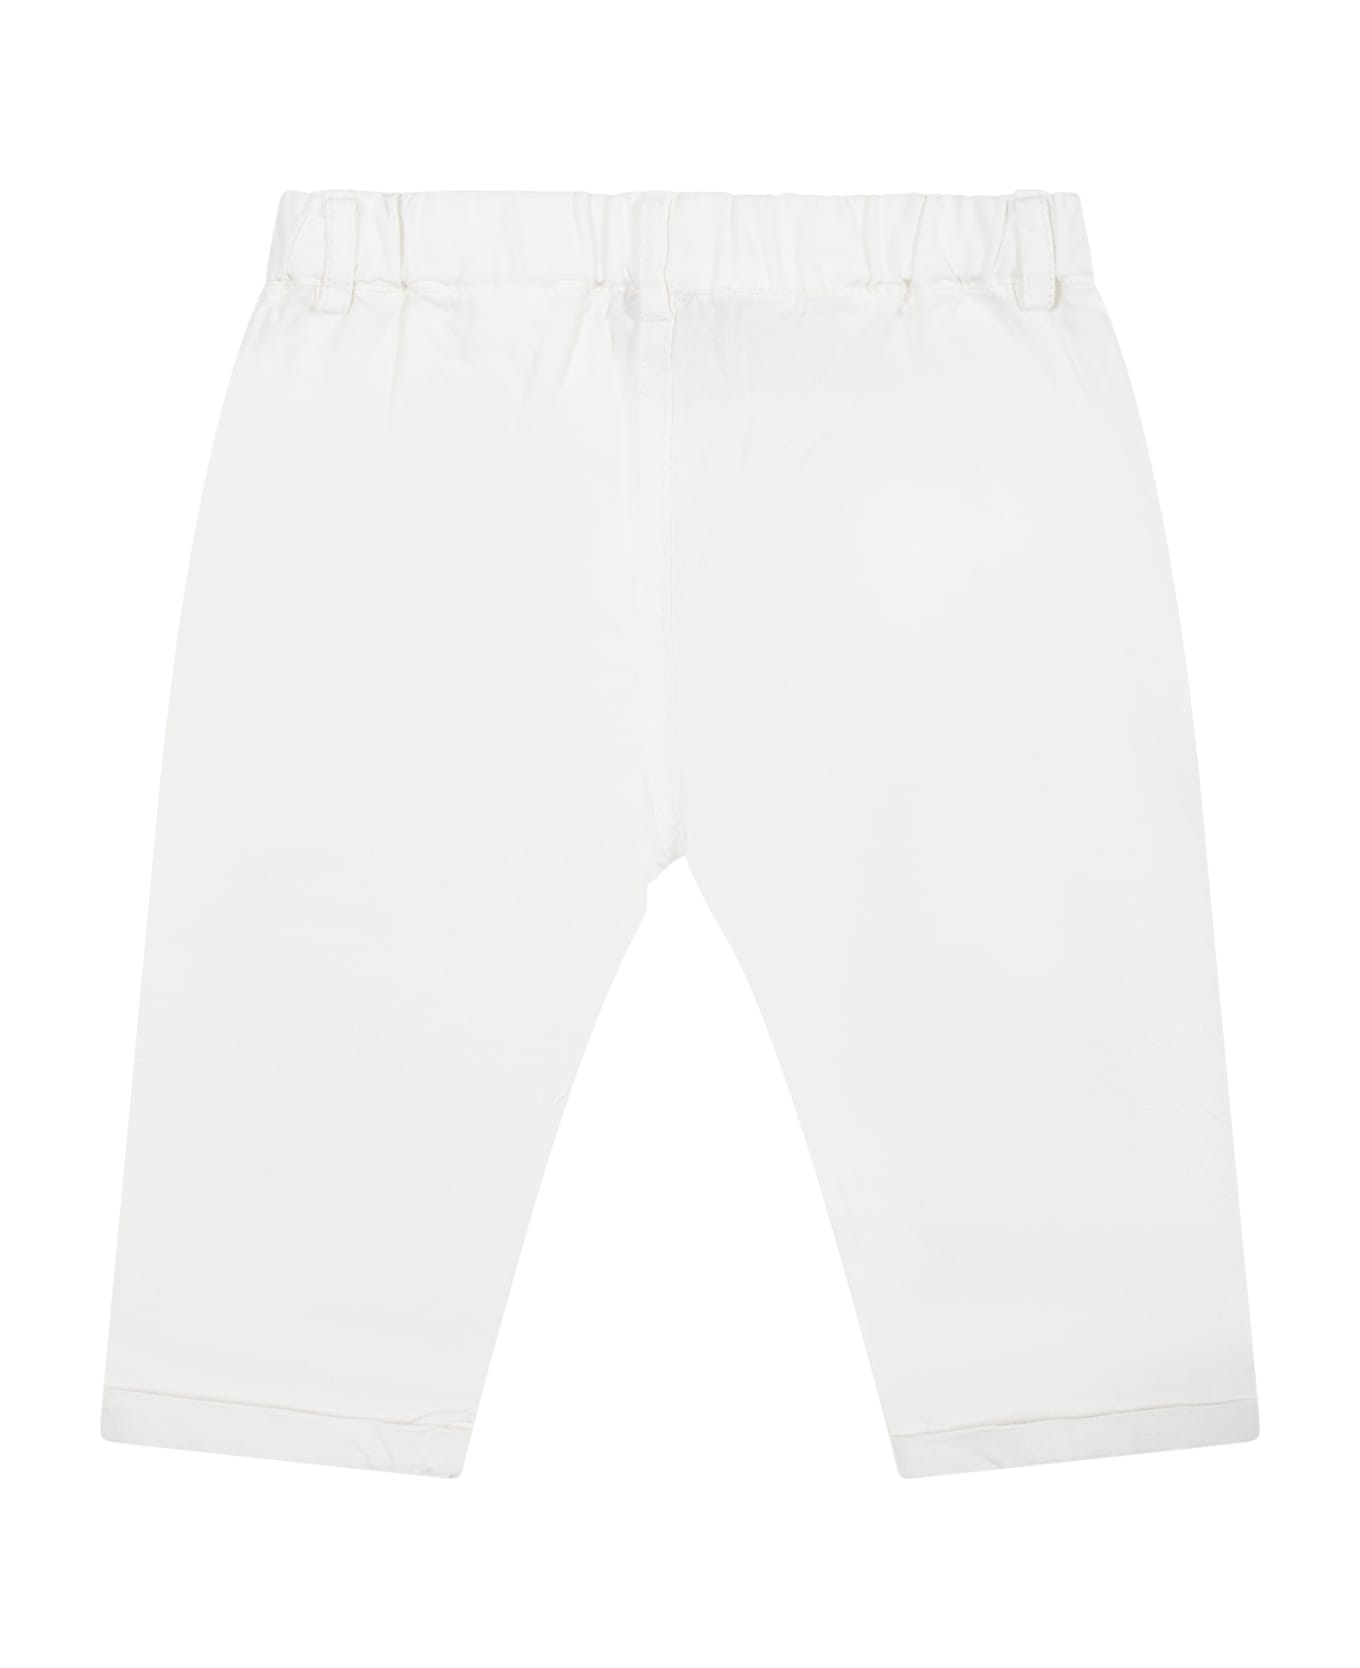 Moschino White Trousers For Baby Boy With Teddy Bear And Logo - White ボトムス